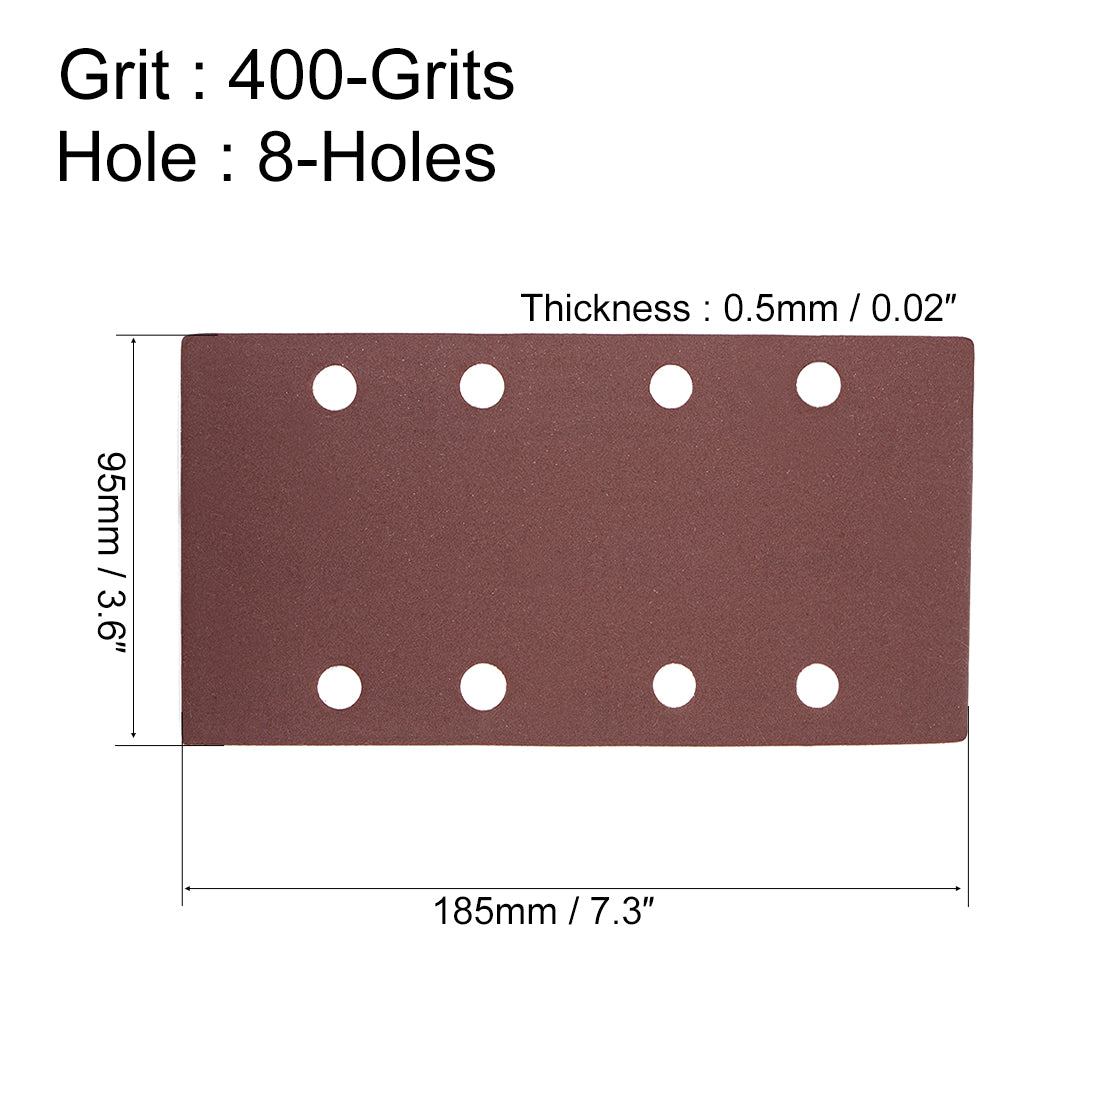 Uxcell Uxcell 100-Grits 8-Holes Hook and Loop Sanding Sheet, 7.3 x 3.6-inch Wet Dry Aluminum Oxide Sandpaper for Sander 10pcs